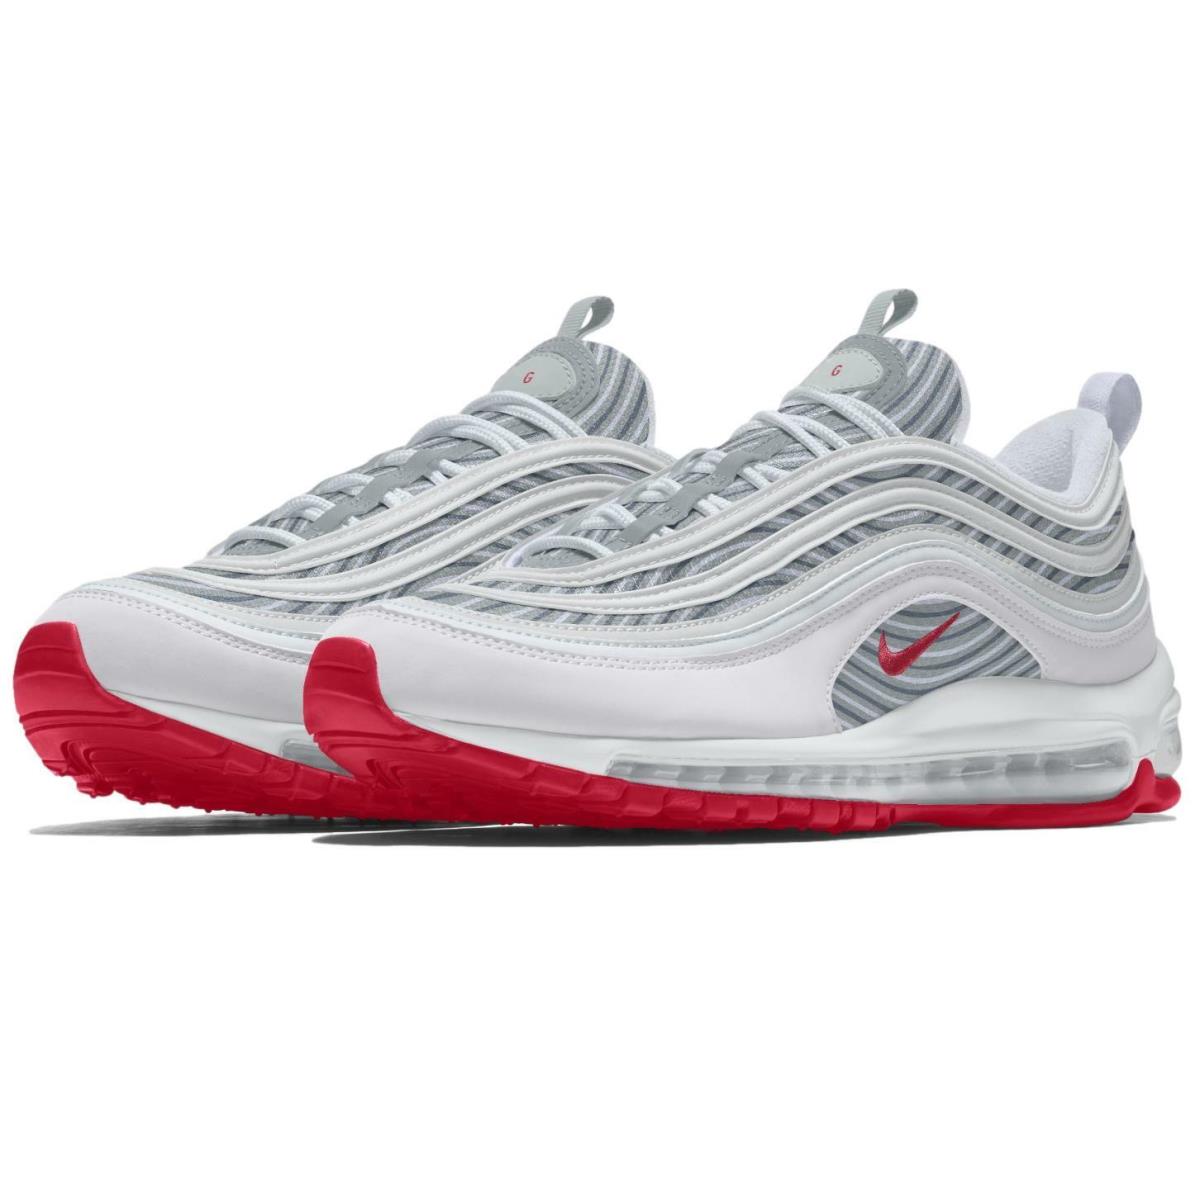 Nike ID By You Women`s Air Max 97 Grey Fog/lt Fusion Red Shoes DJ3180-991